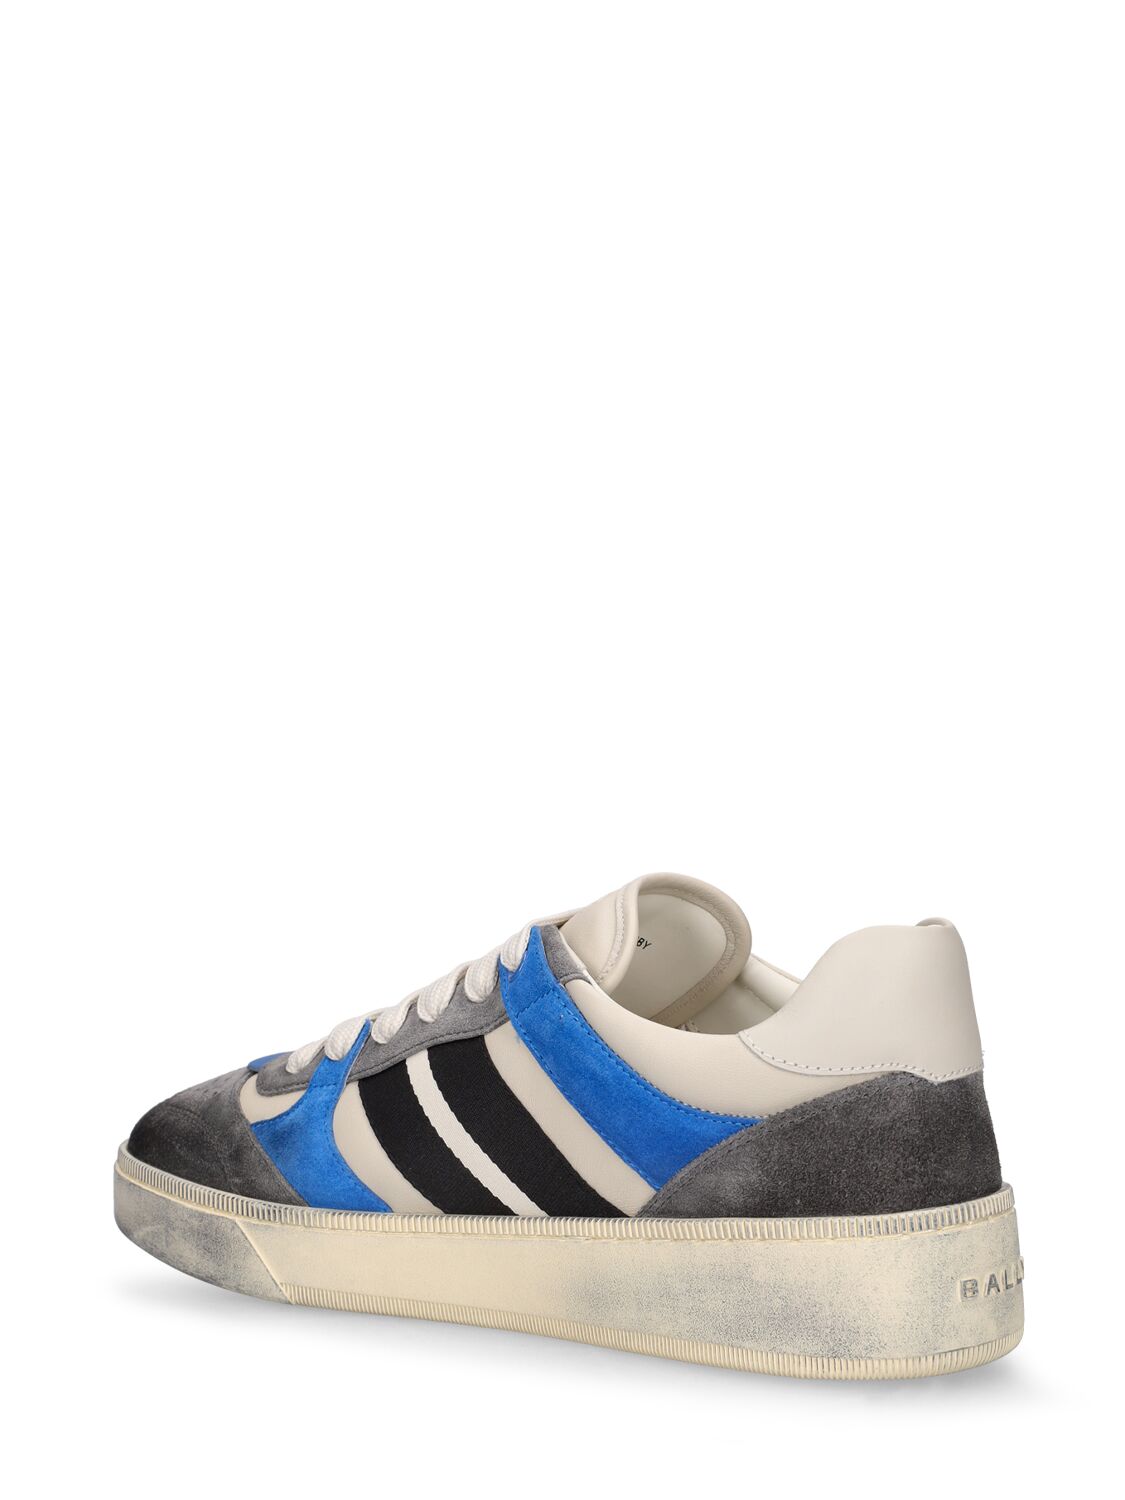 Shop Bally Rebby Leather & Suede Sneakers In Grey,blue